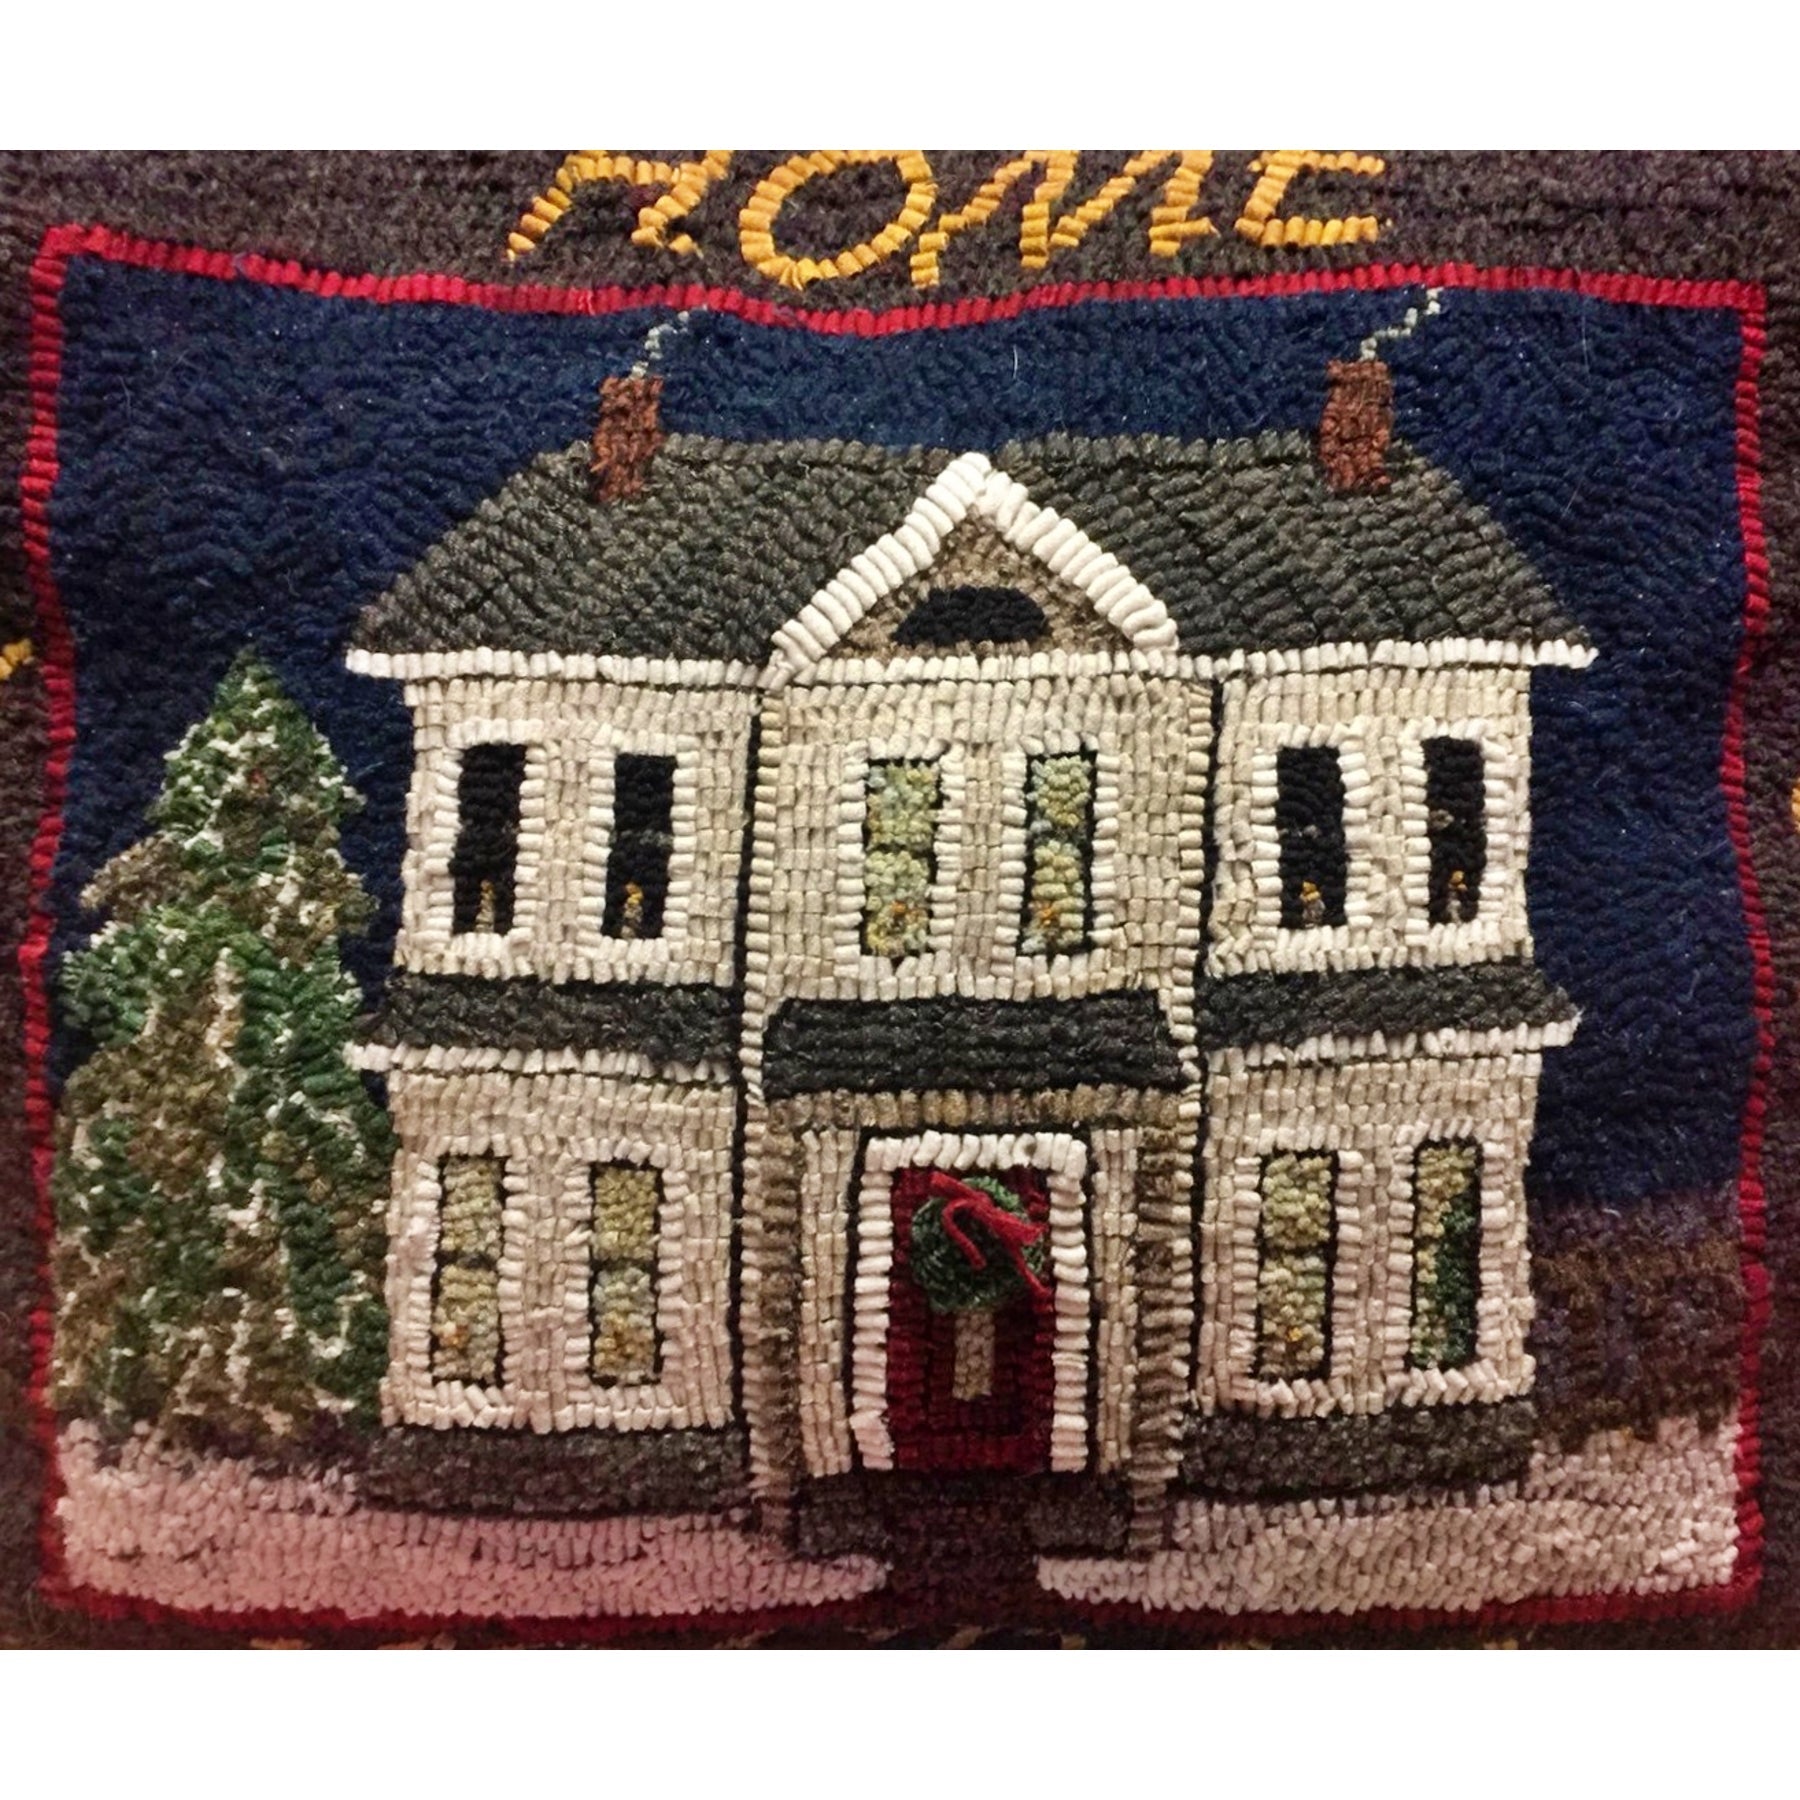 Home for the Holidays, rug hooking pattern